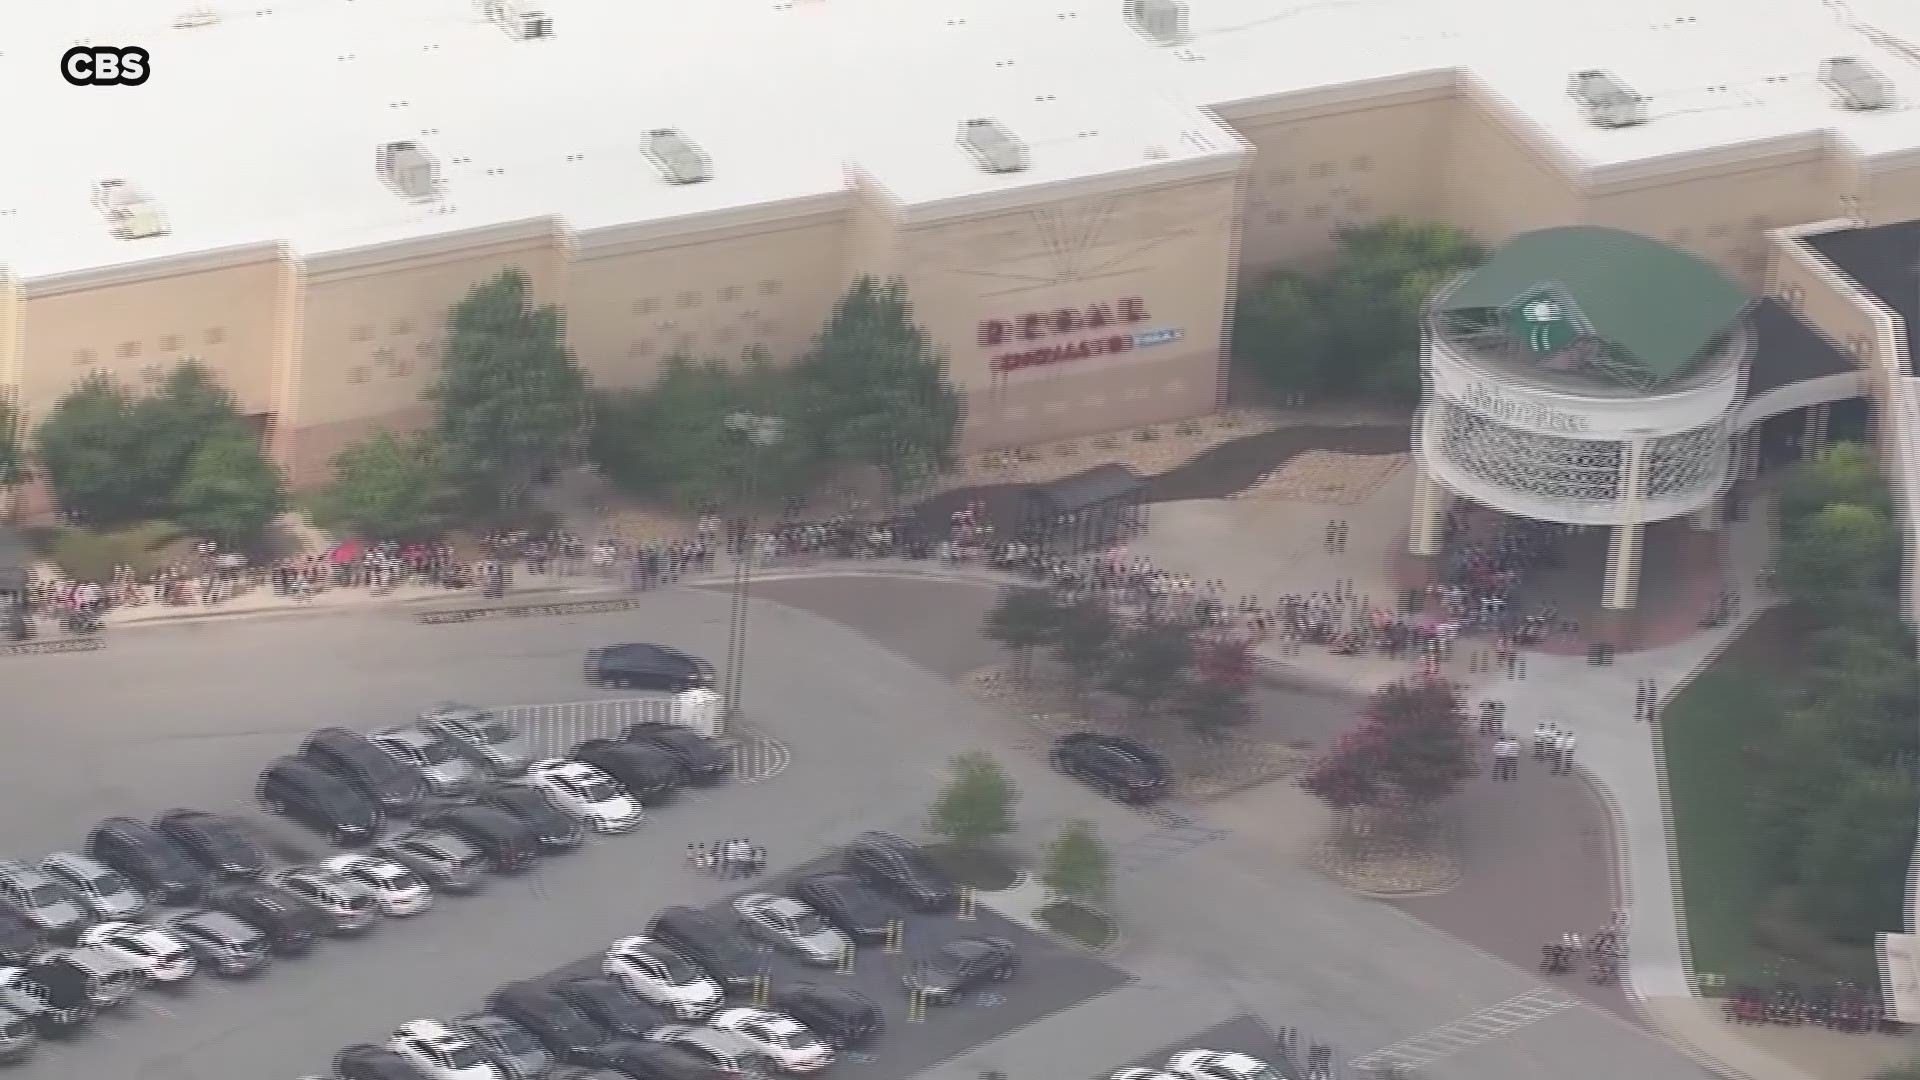 Build A Bear mania includes long lines at stores all across the nation